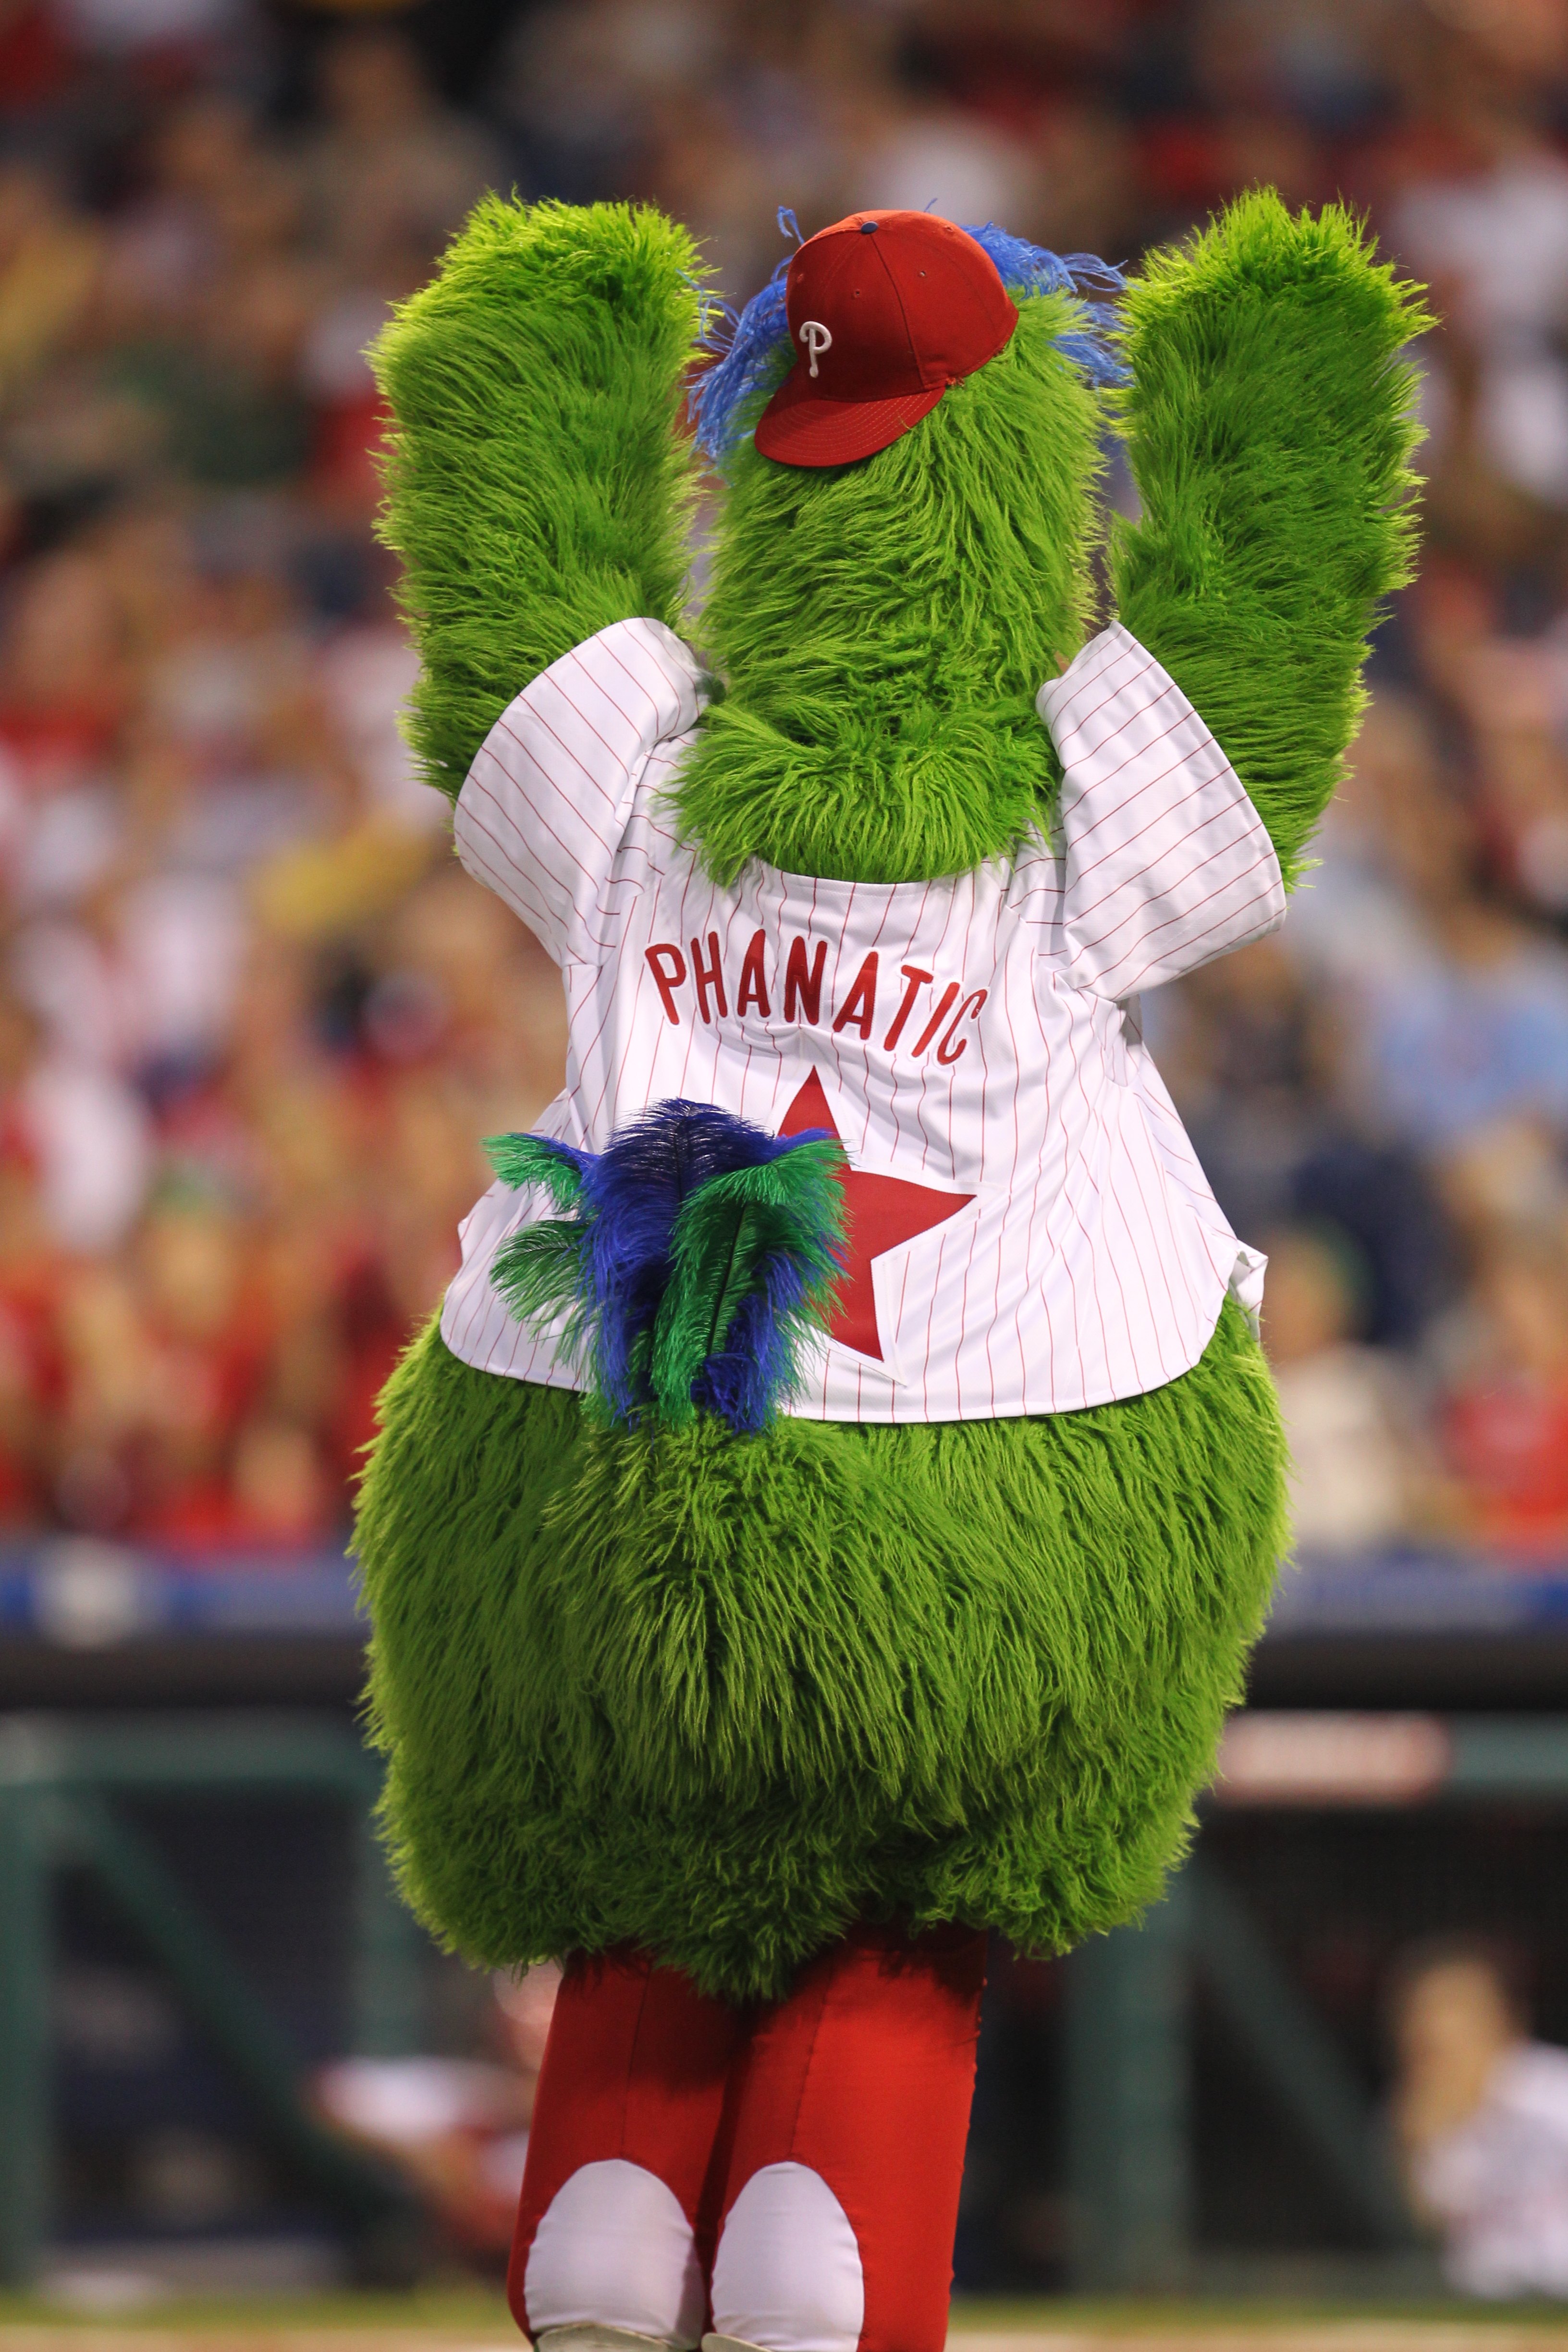 PHILADELPHIA - MAY 2: The Phillie Phanatic performs during the game between the New York Mets and the Philadelphia Phillies at Citizens Bank Park on May 2, 2010 in Philadelphia, Pennsylvania. The Phillies won 11-5. (Photo by Hunter Martin/Getty Images)